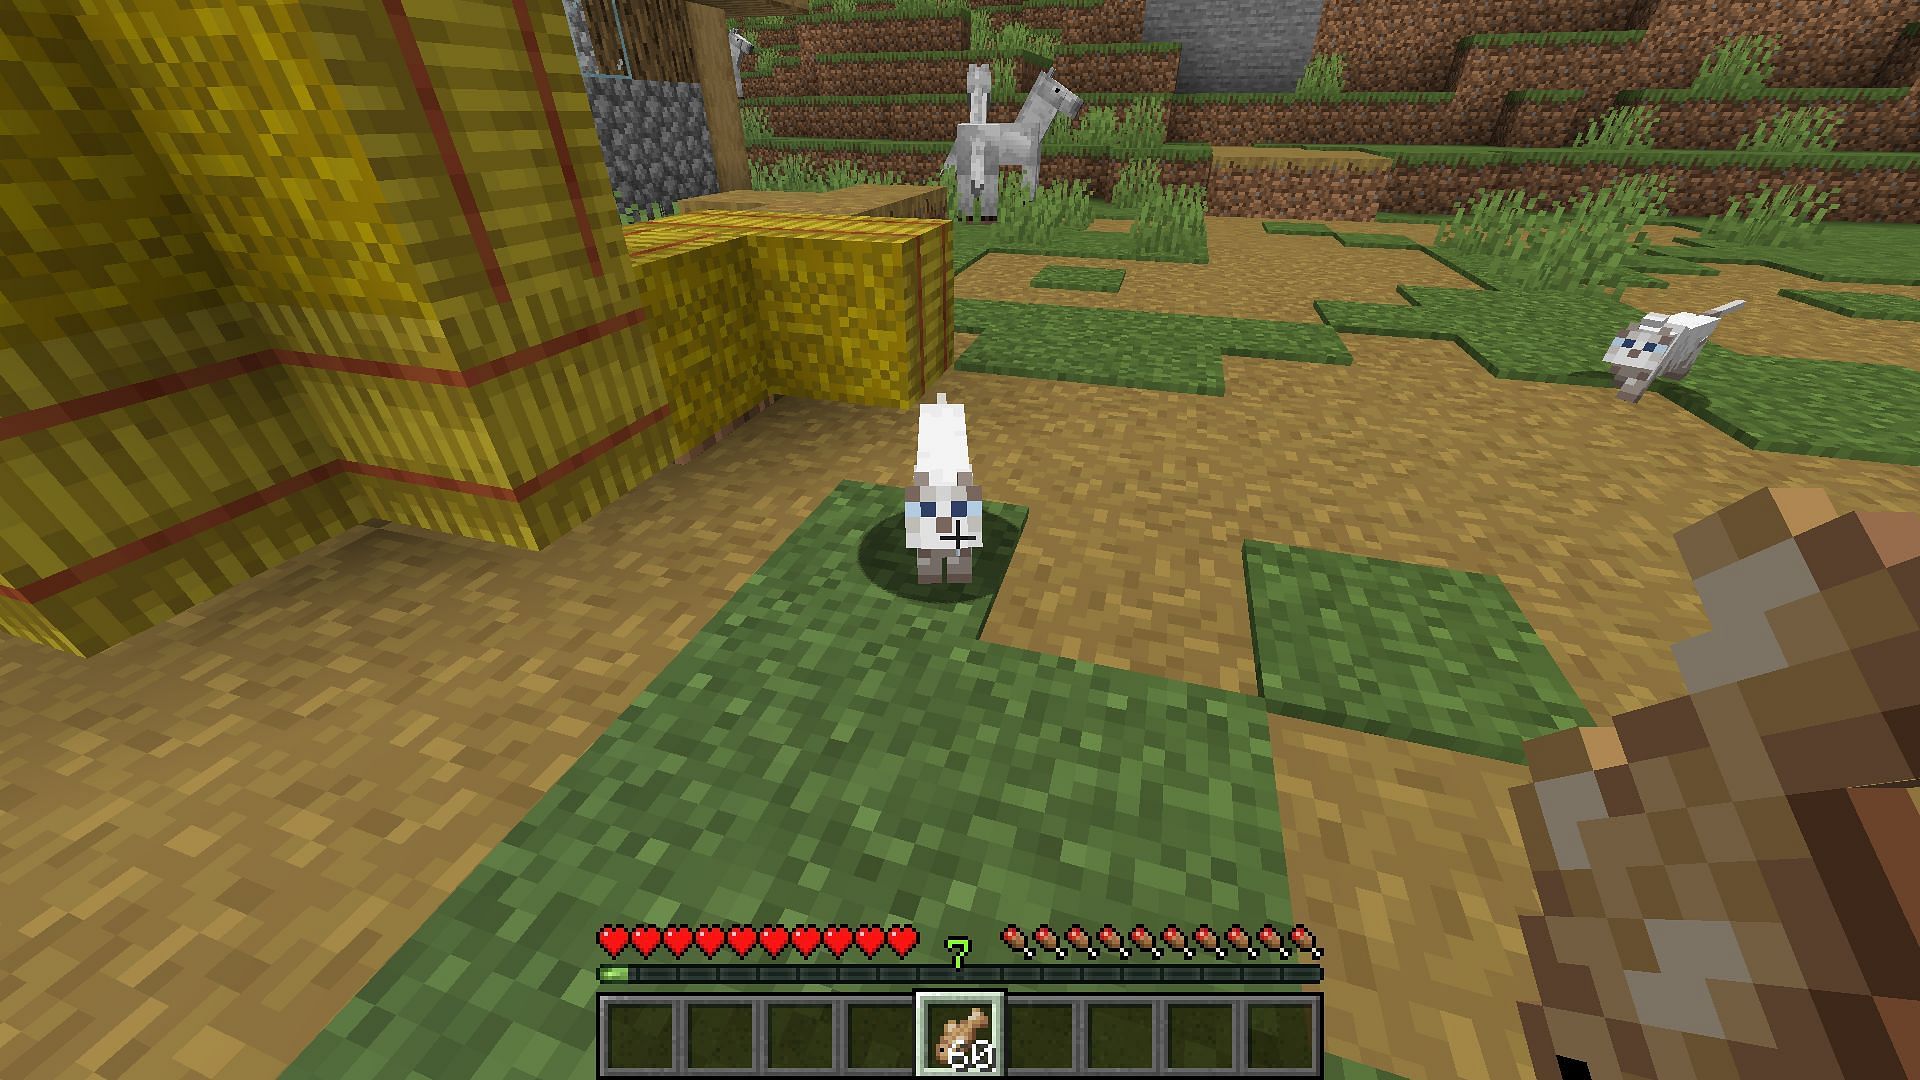 Cats can be found in villages (Image via Minecraft 1.19 update)